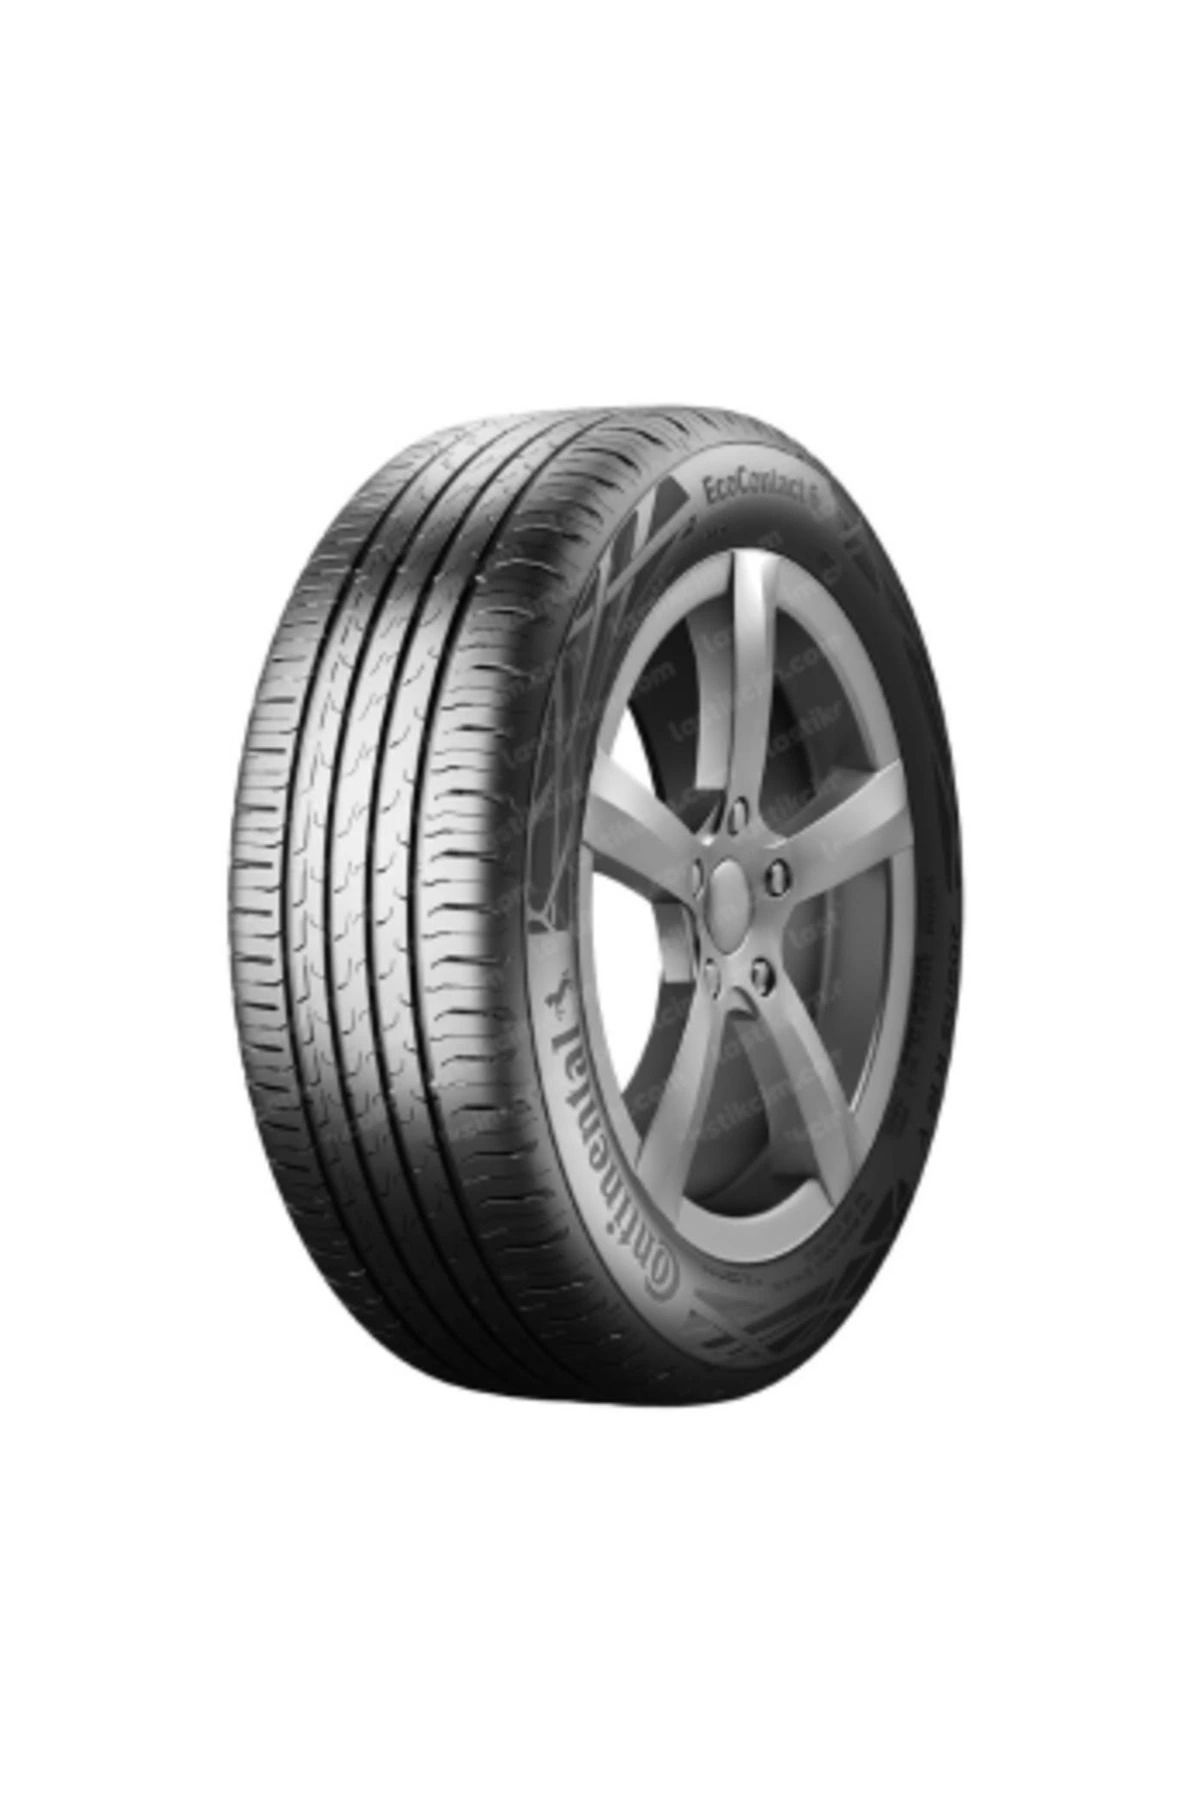 Continental 185/65R15 88H ULTRACONTACT